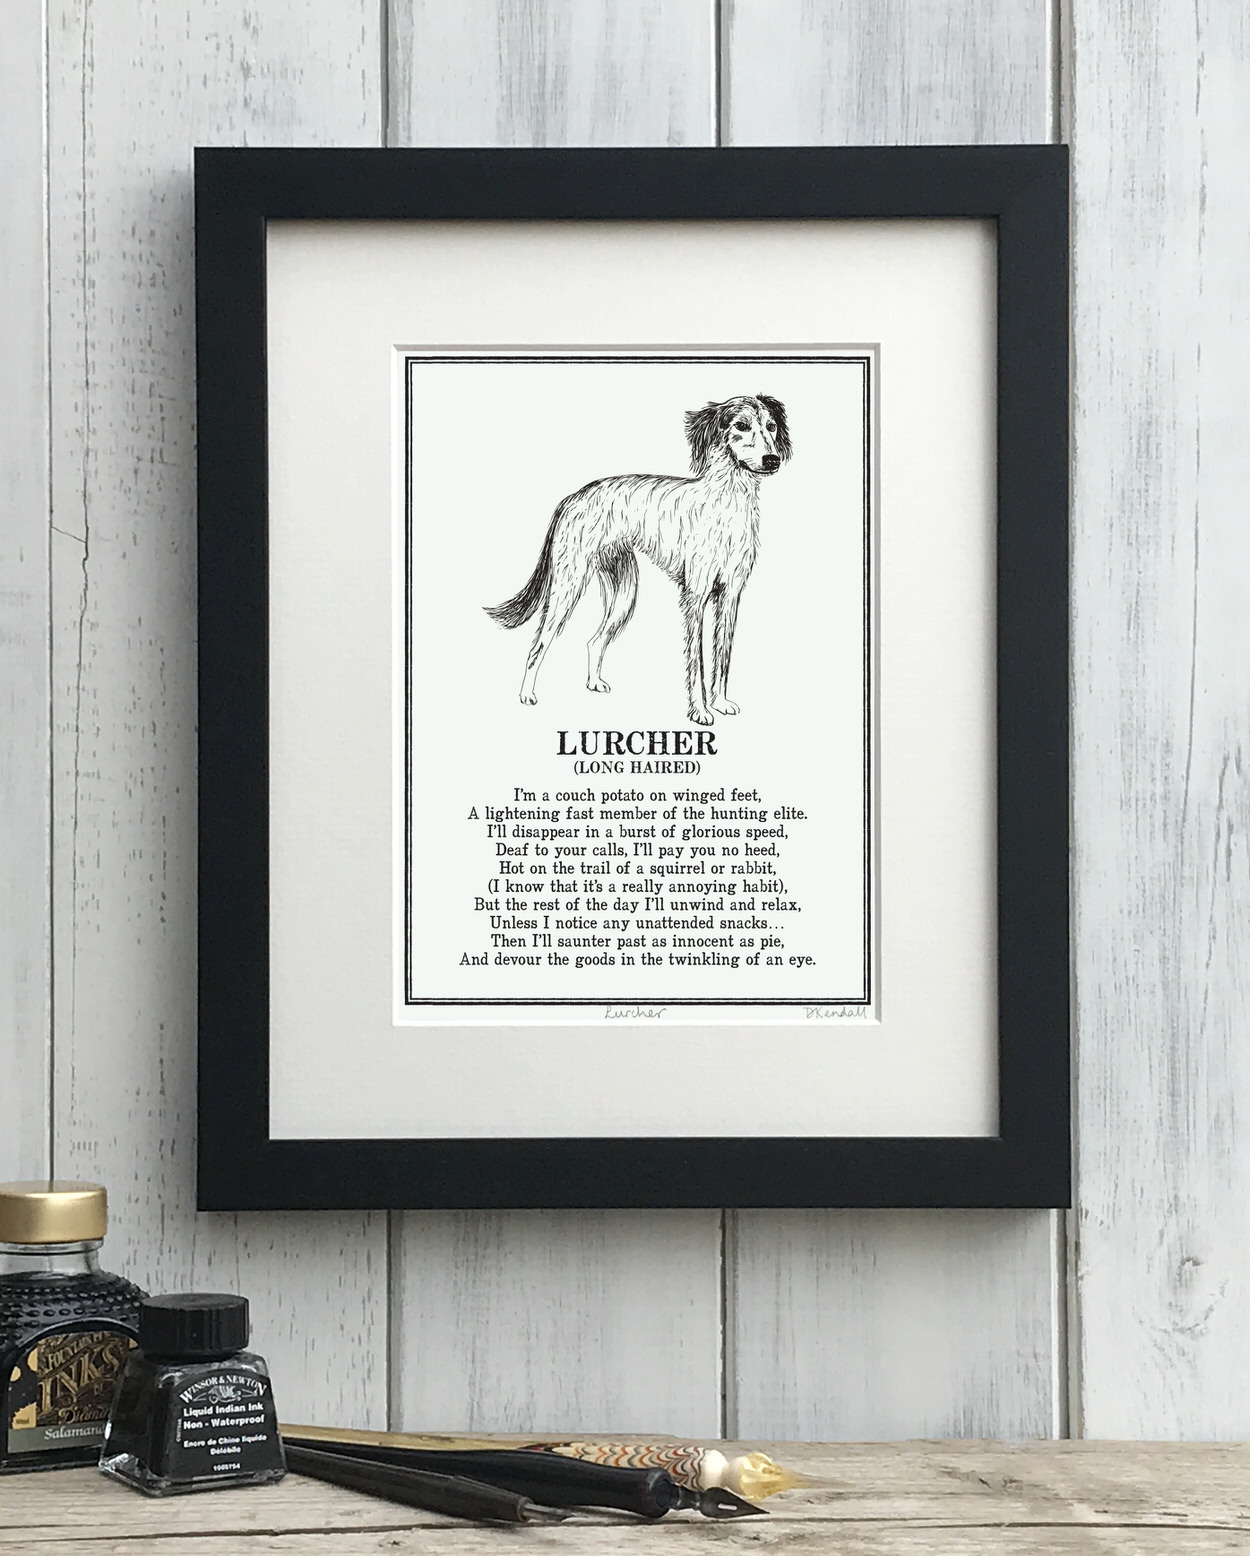 Long Haired Lurcher Doggerel Illustrated Poem Art Print | The Enlightened Hound